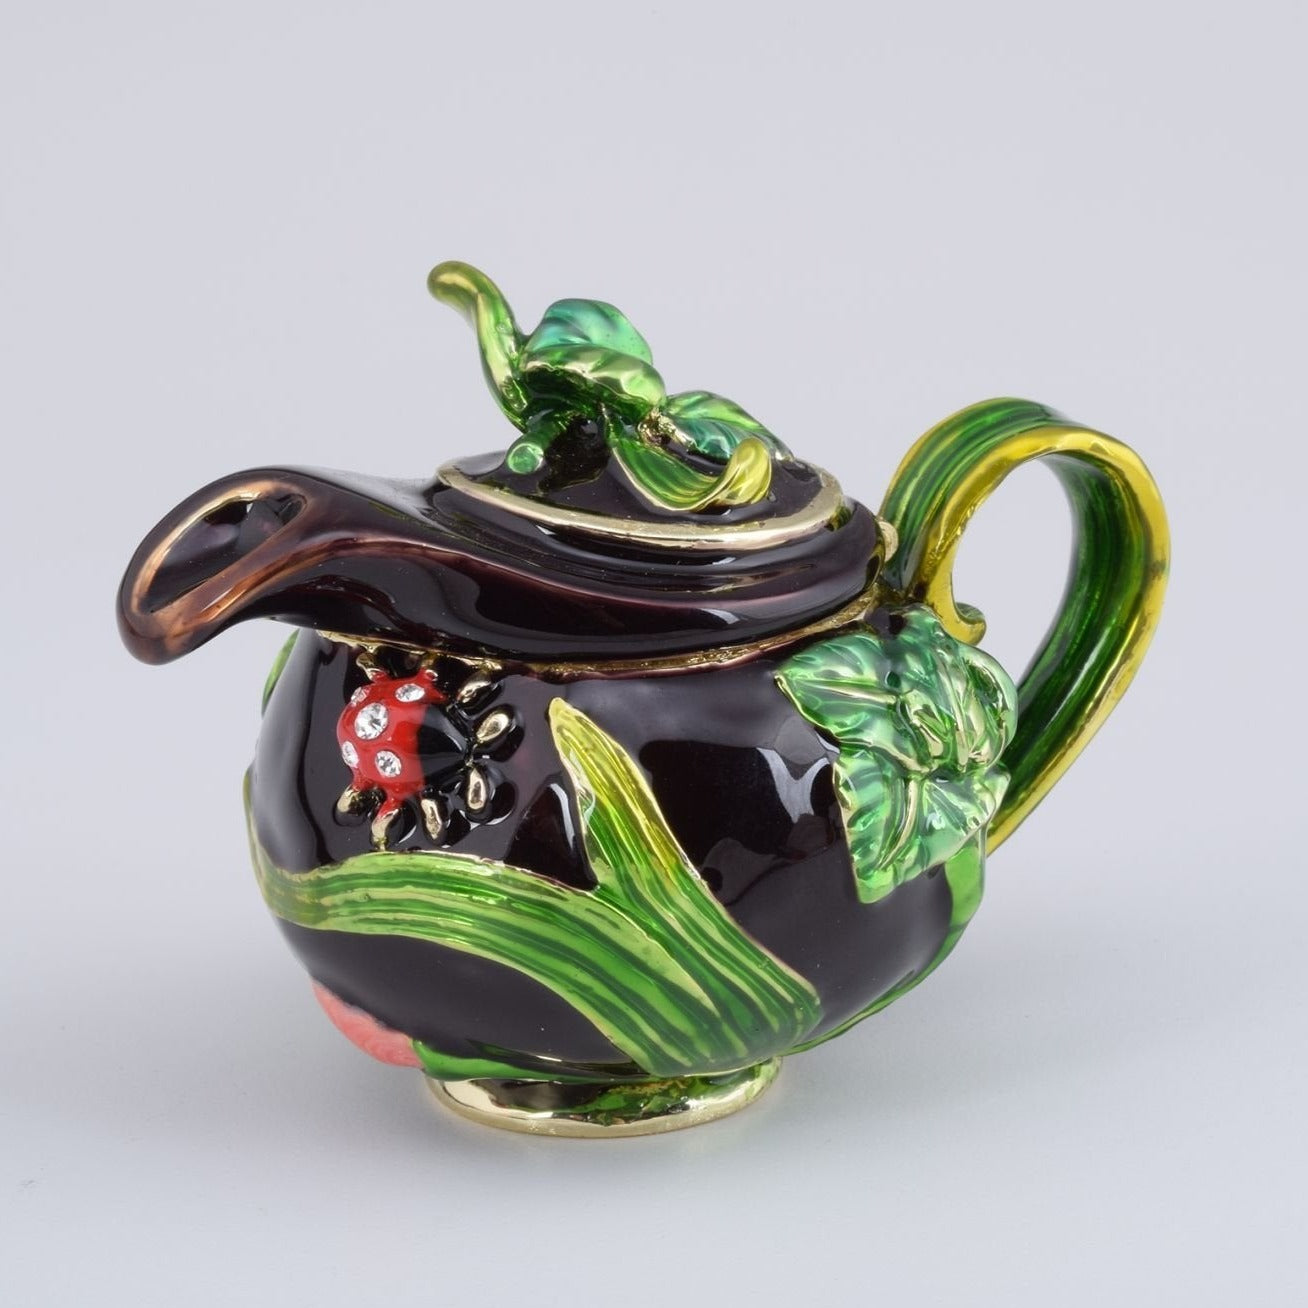 Keren Kopal Teapot Decorated with a Ladybug and a Dragonfly  57.75